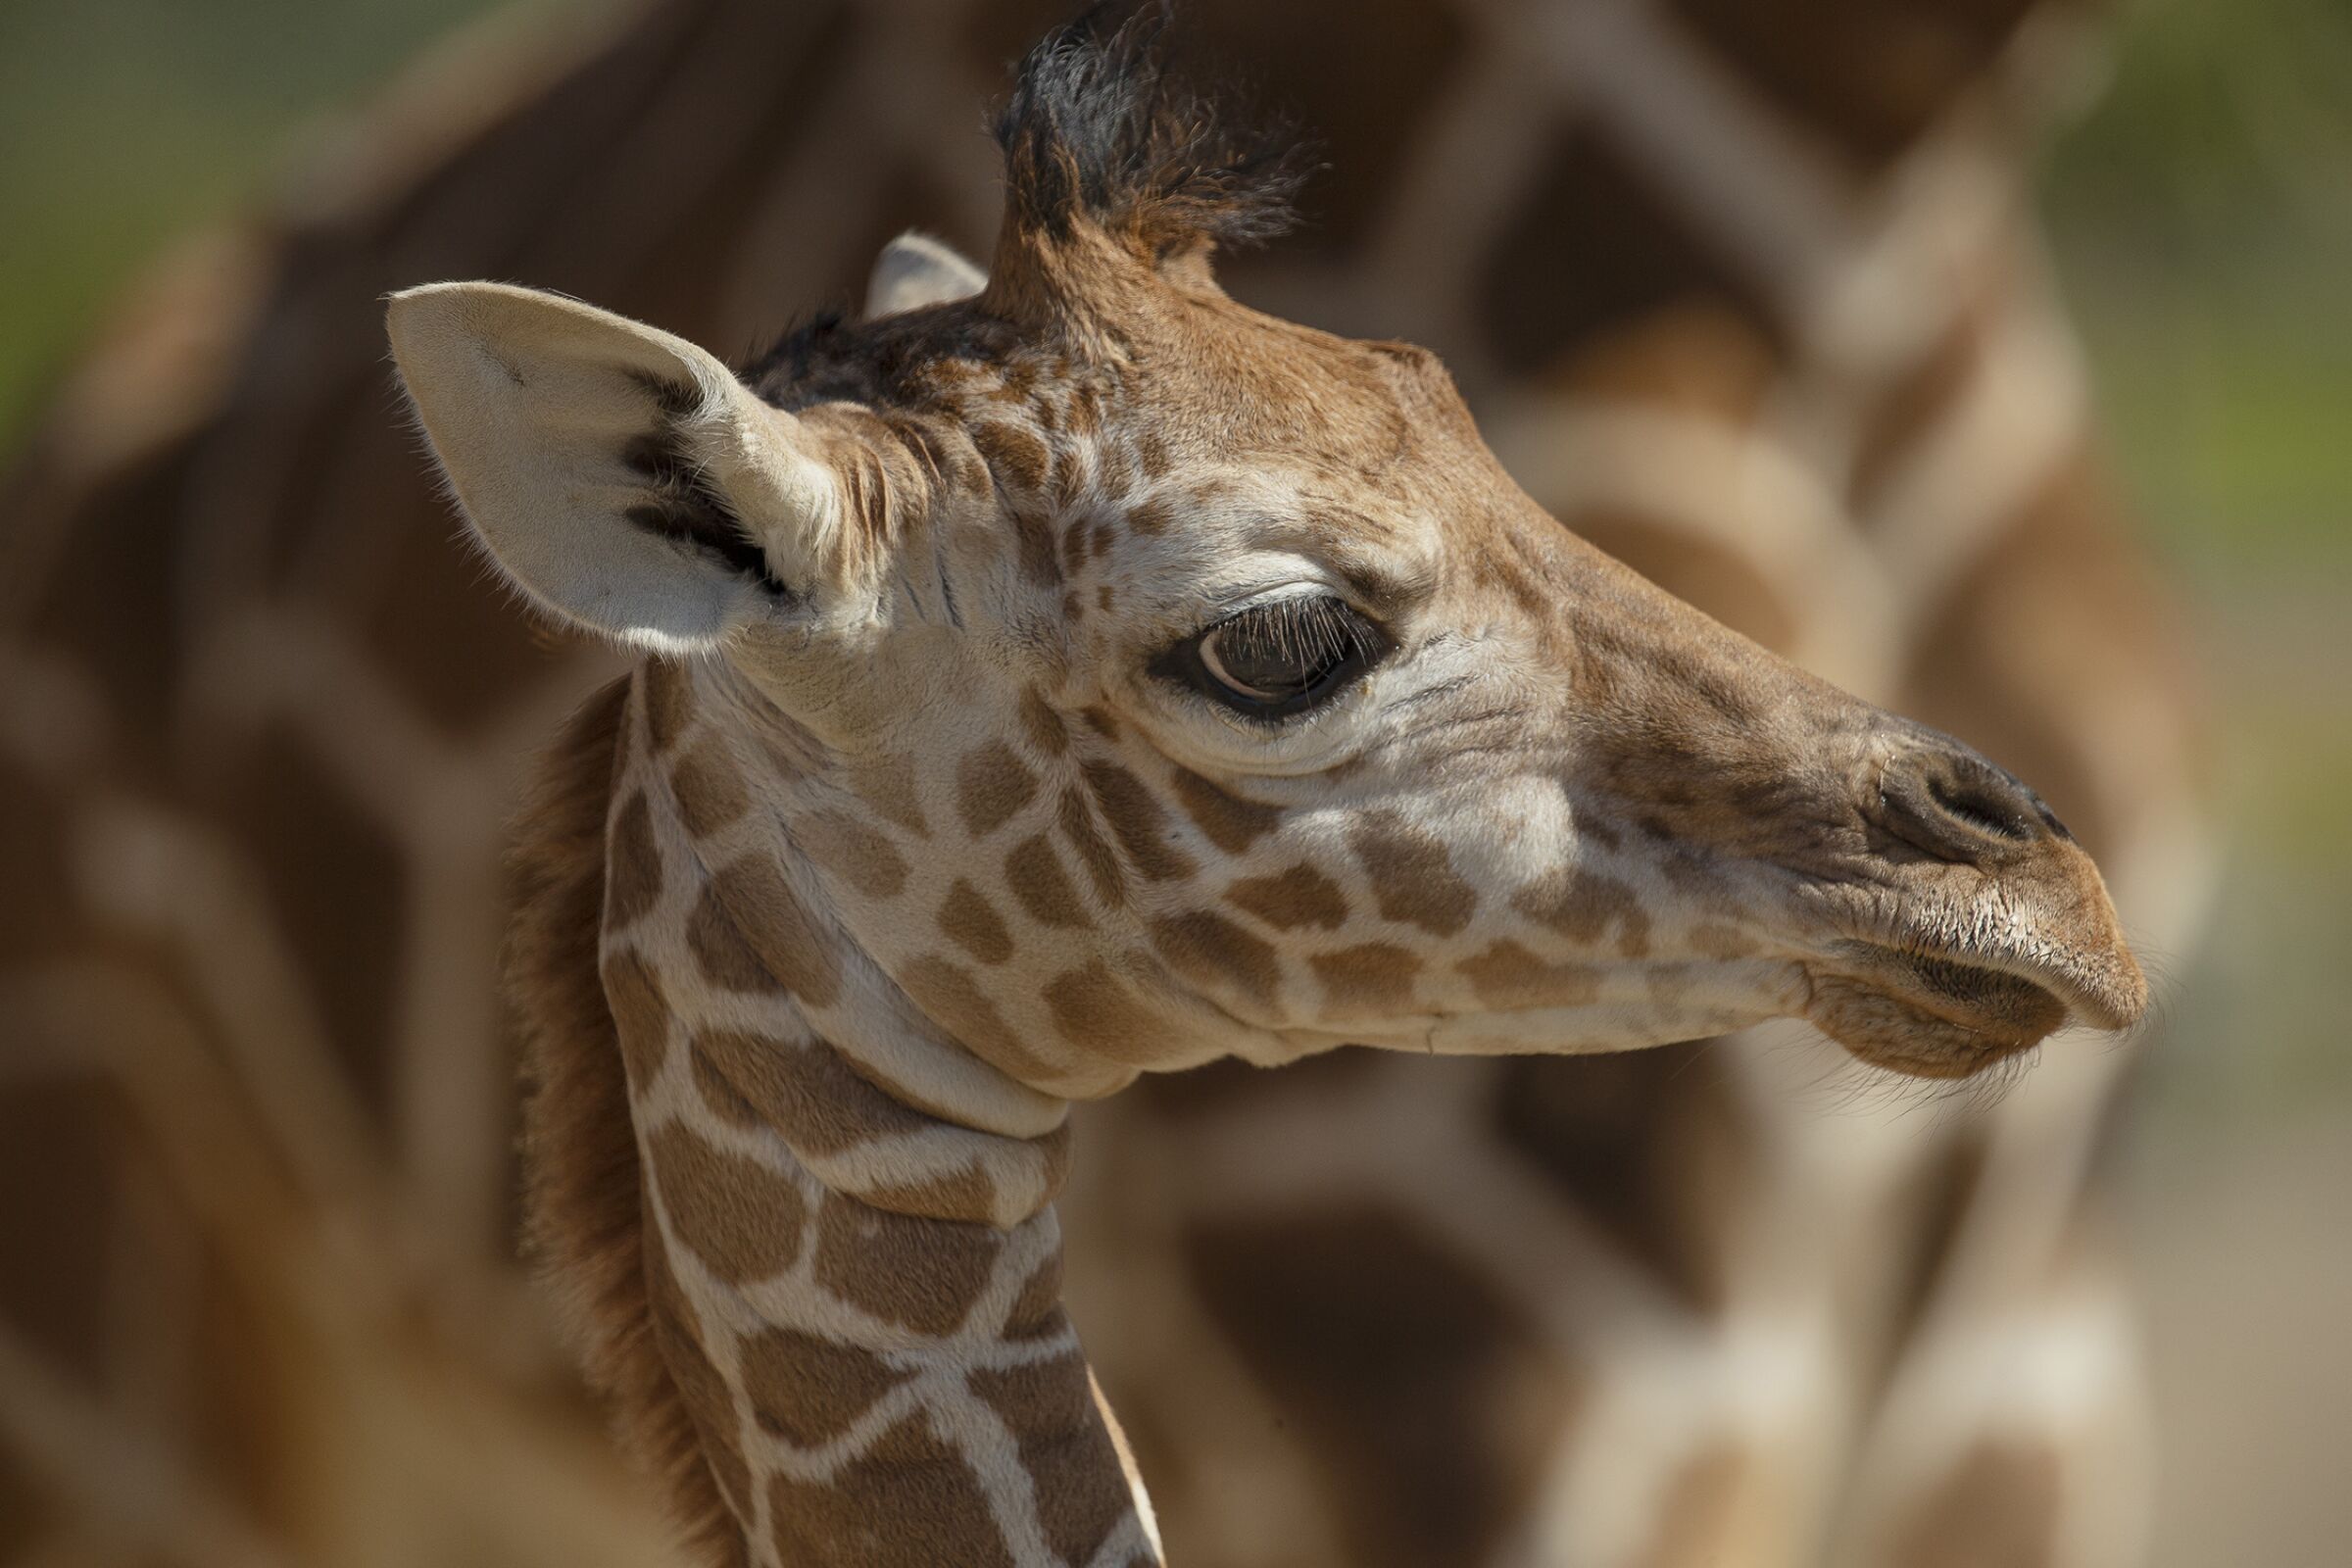 One-month-old giraffe calf, Zahara, is the newest addition at the San Diego Zoo Safari Park.